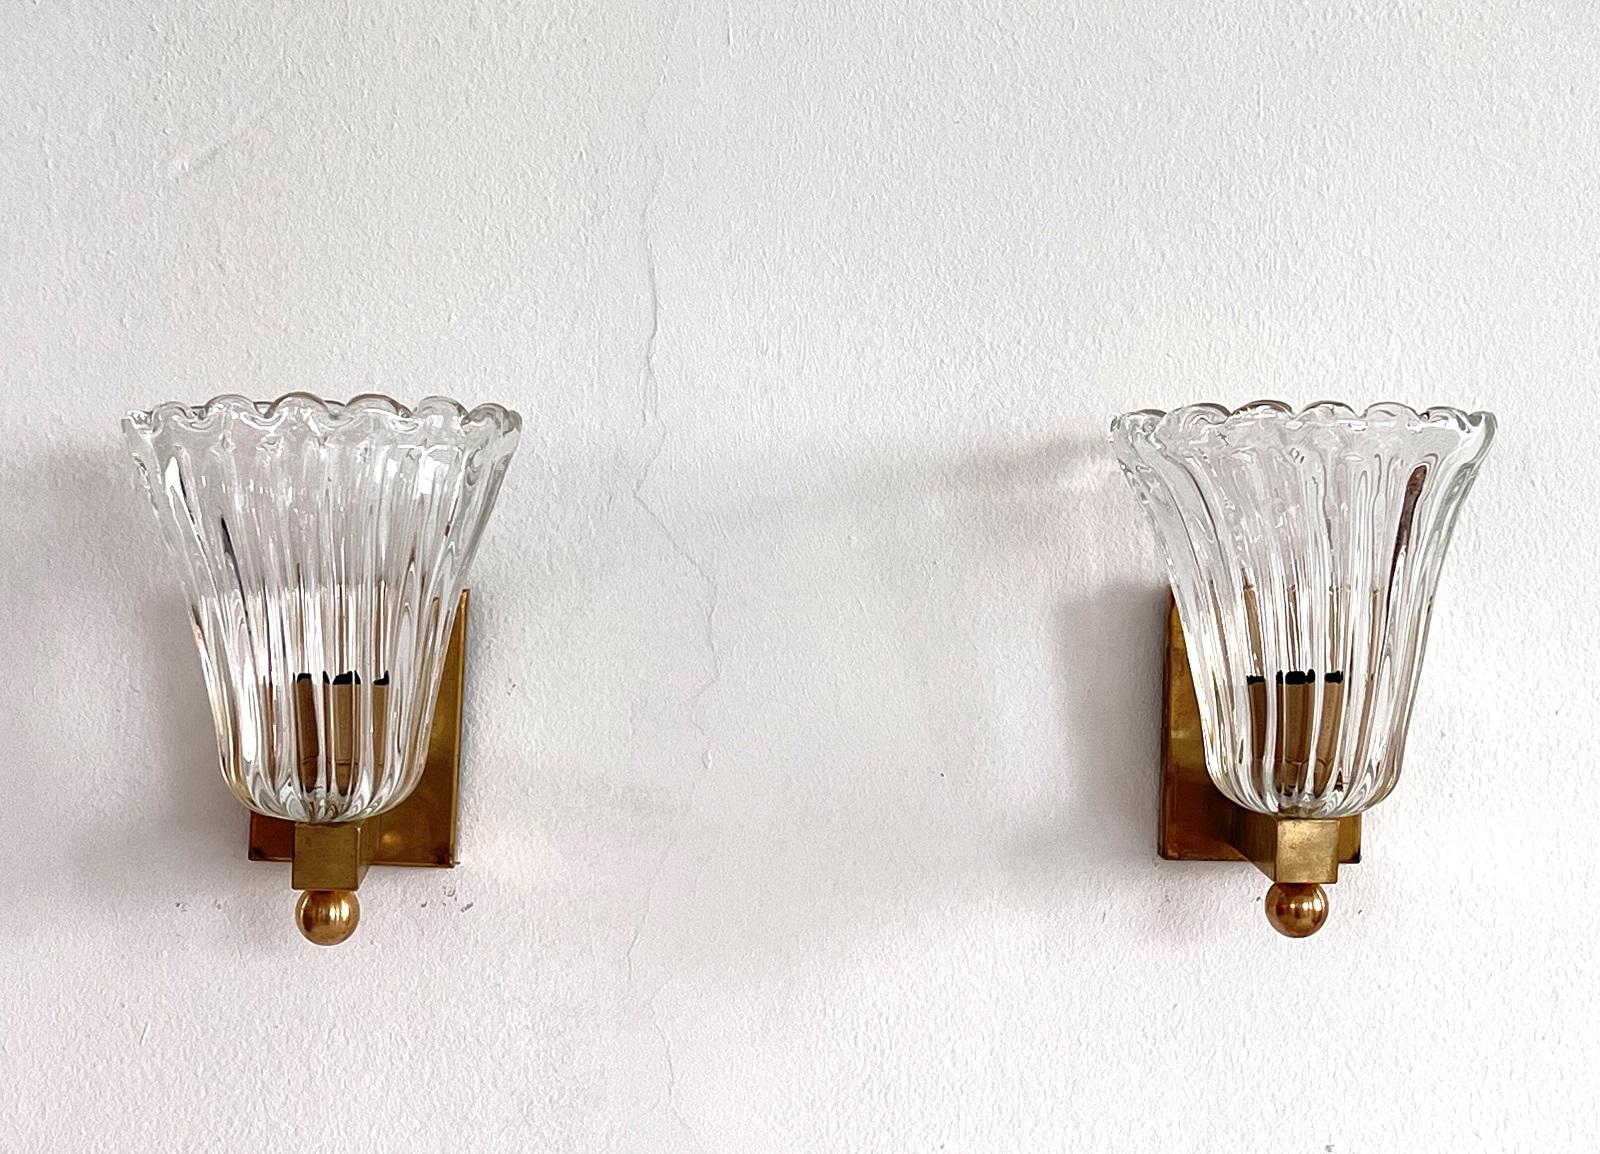 Italian Brass and Murano Glass Wall Lights or Sconces in Art Deco Style, 1990s For Sale 2